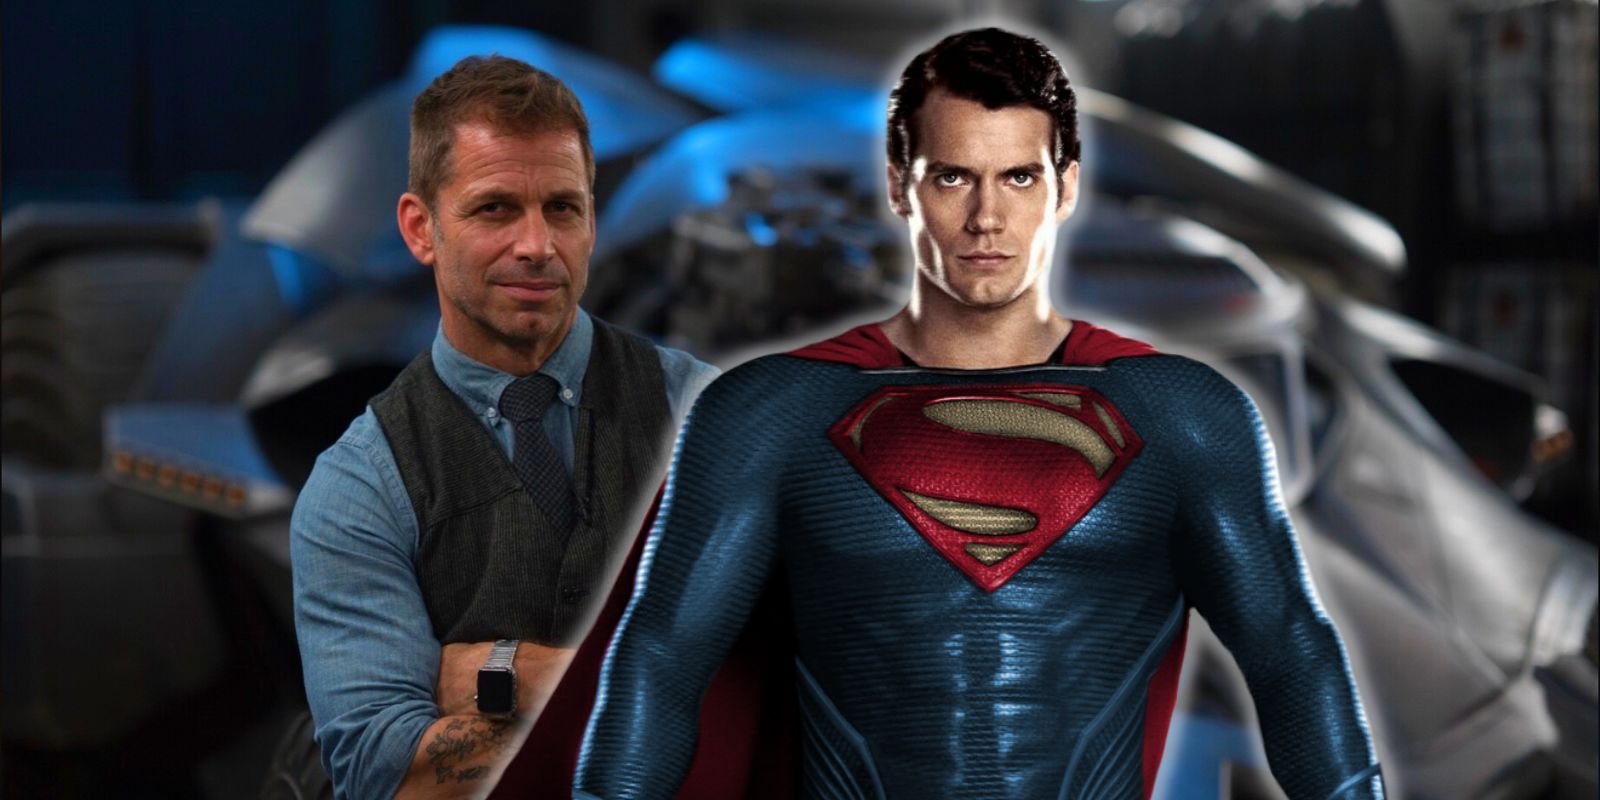 Zack Snyder is posing behind Henry Cavill's Superman